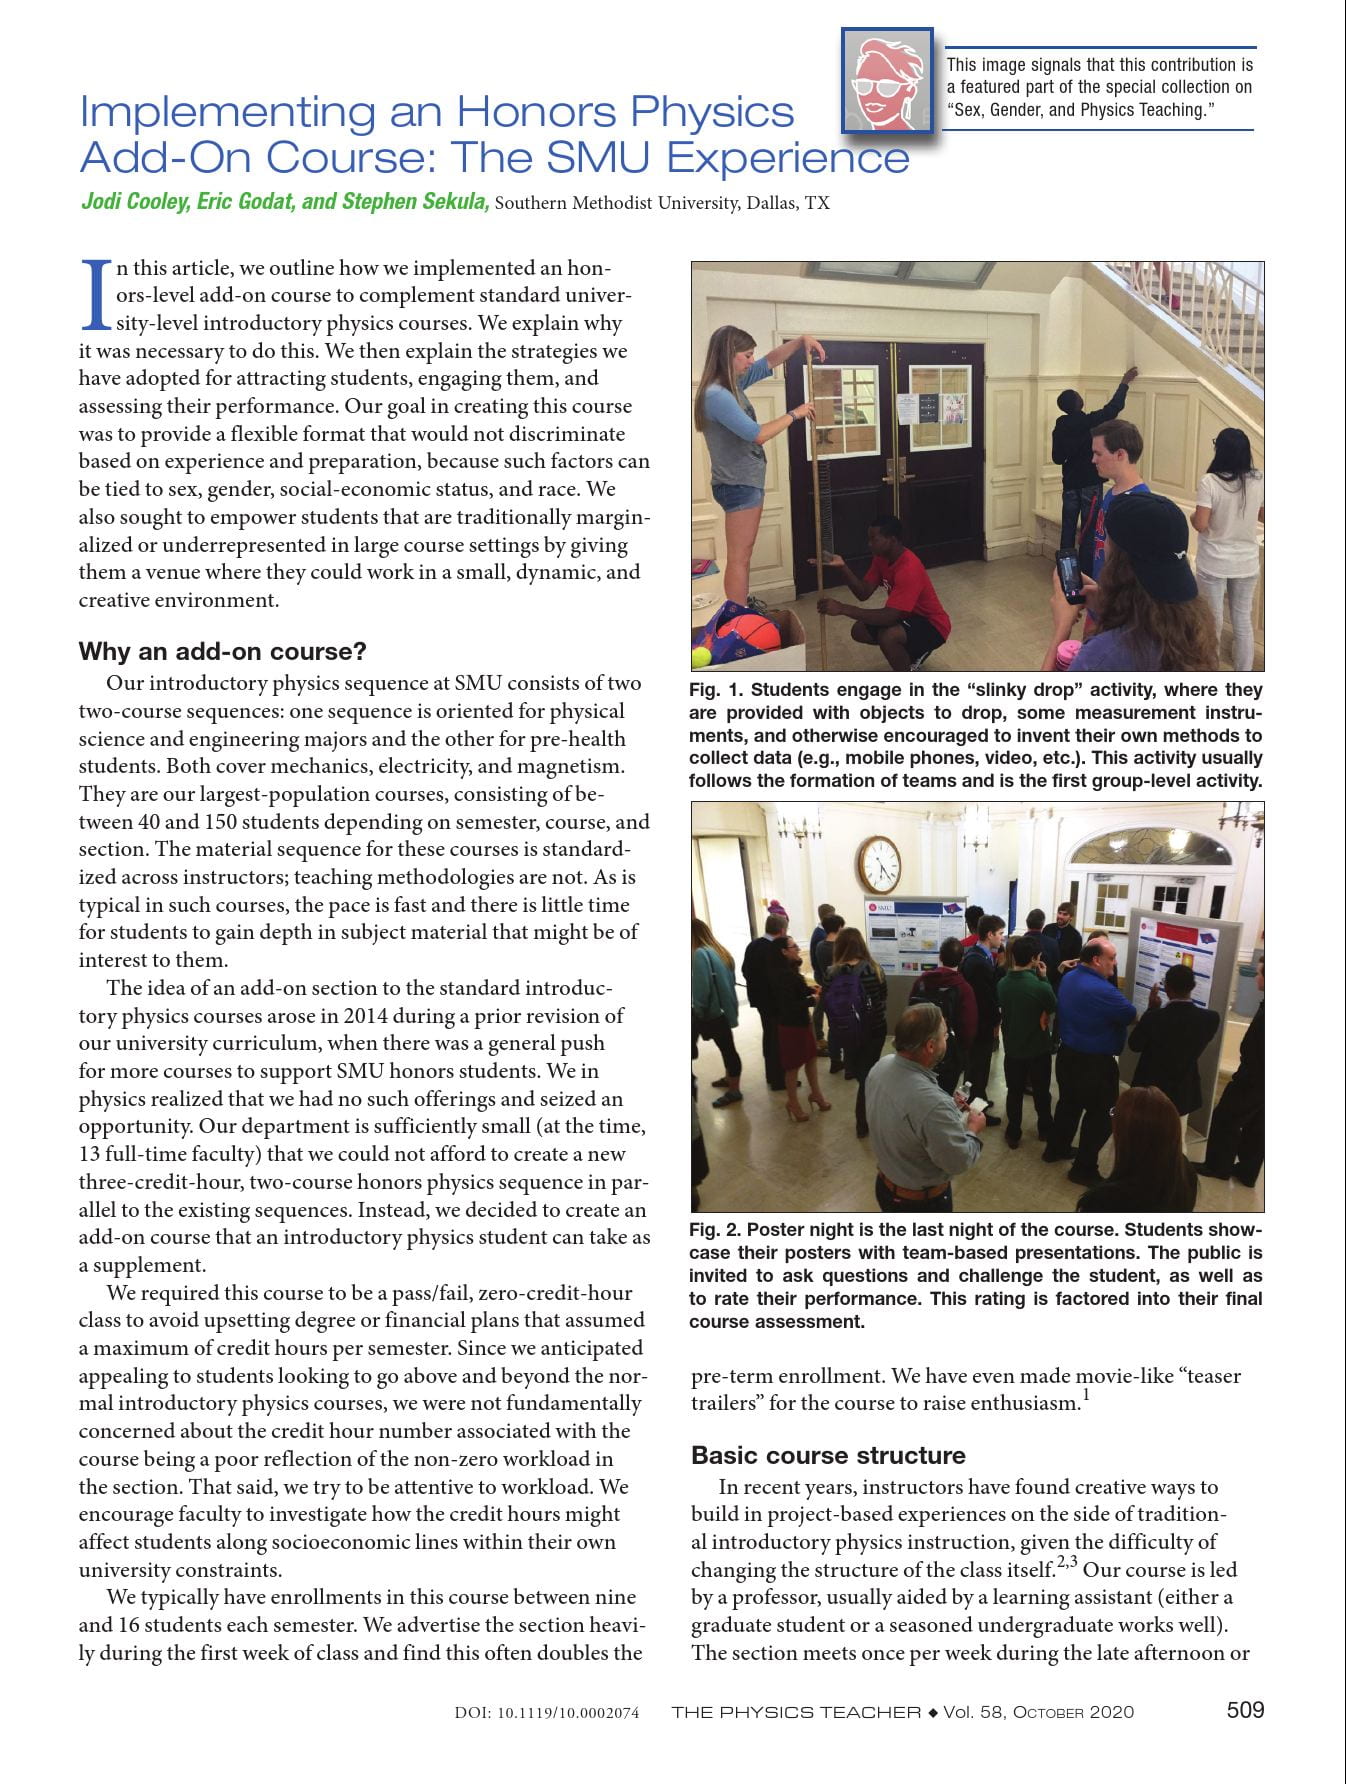 First page of the SMU Honors Physics TPT article